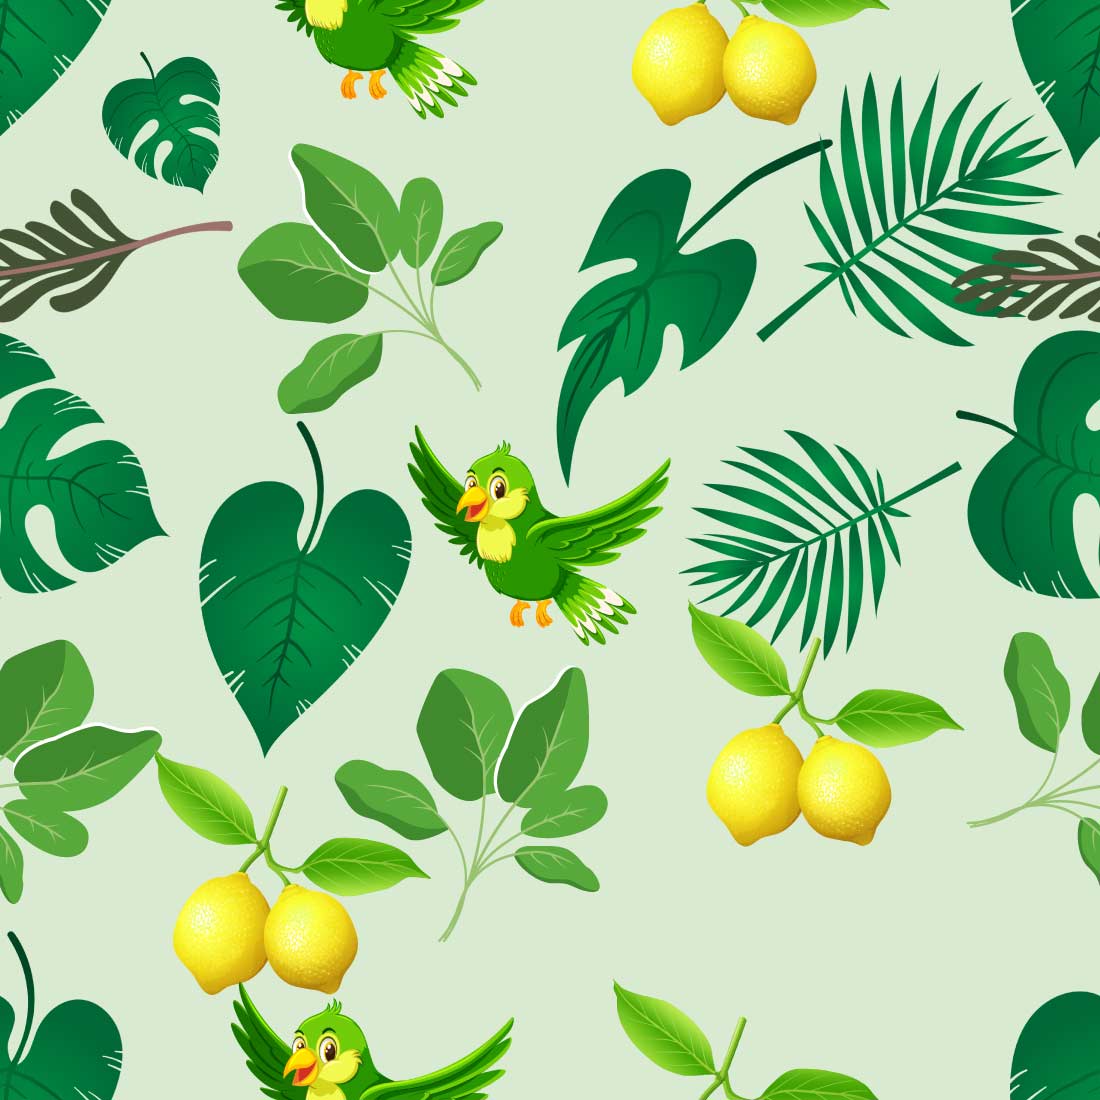 Pattern Design with parrots in the background preview image.